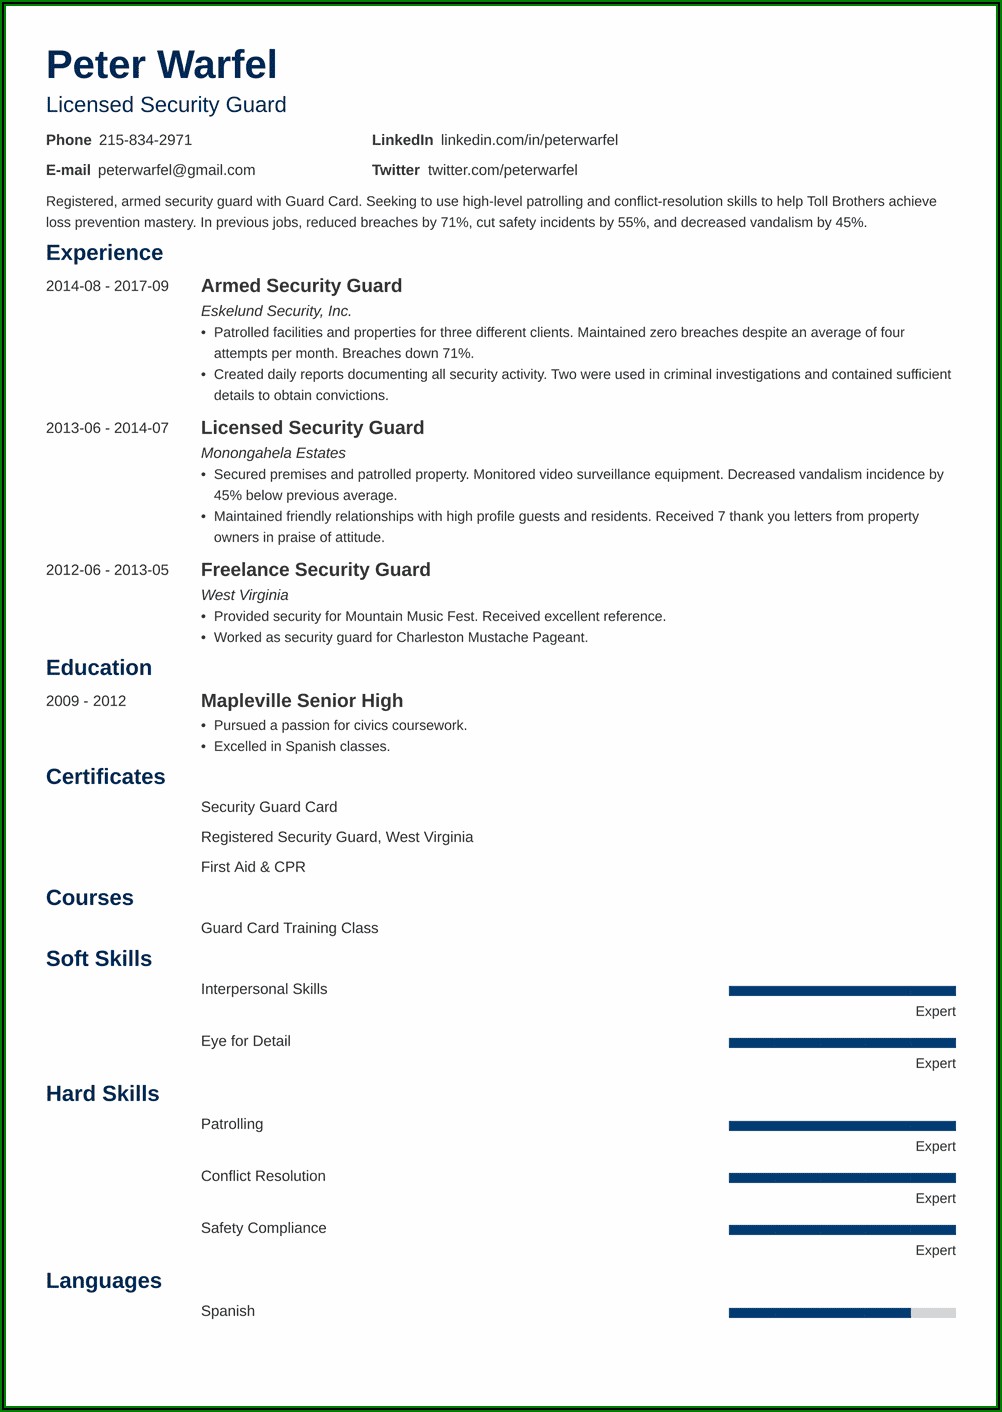 Resume Format For Security Guard